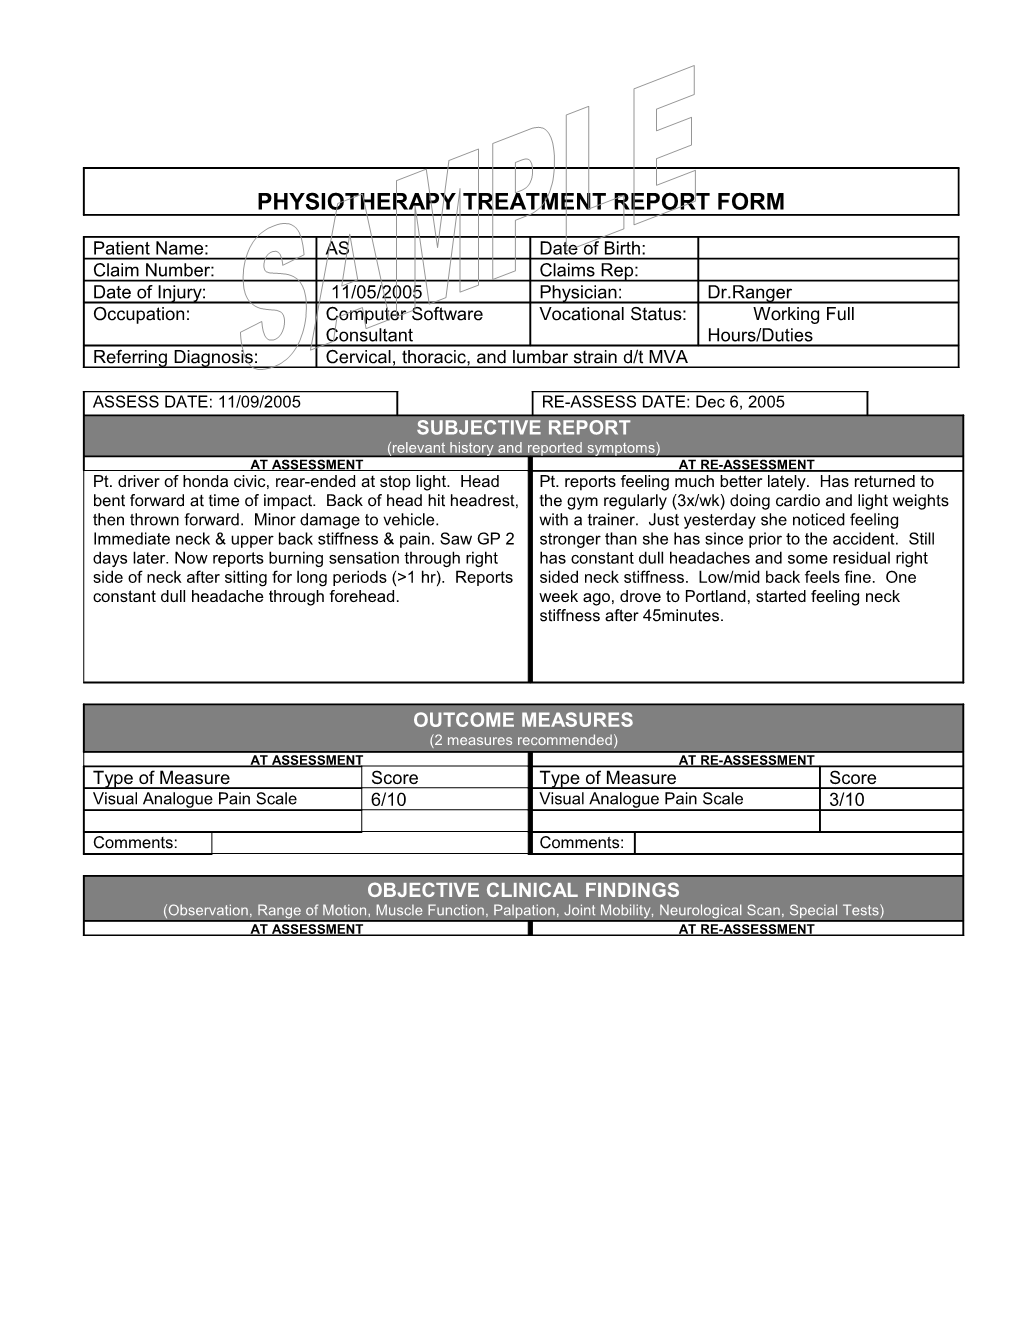 Physiotherapy Treatment Report Form